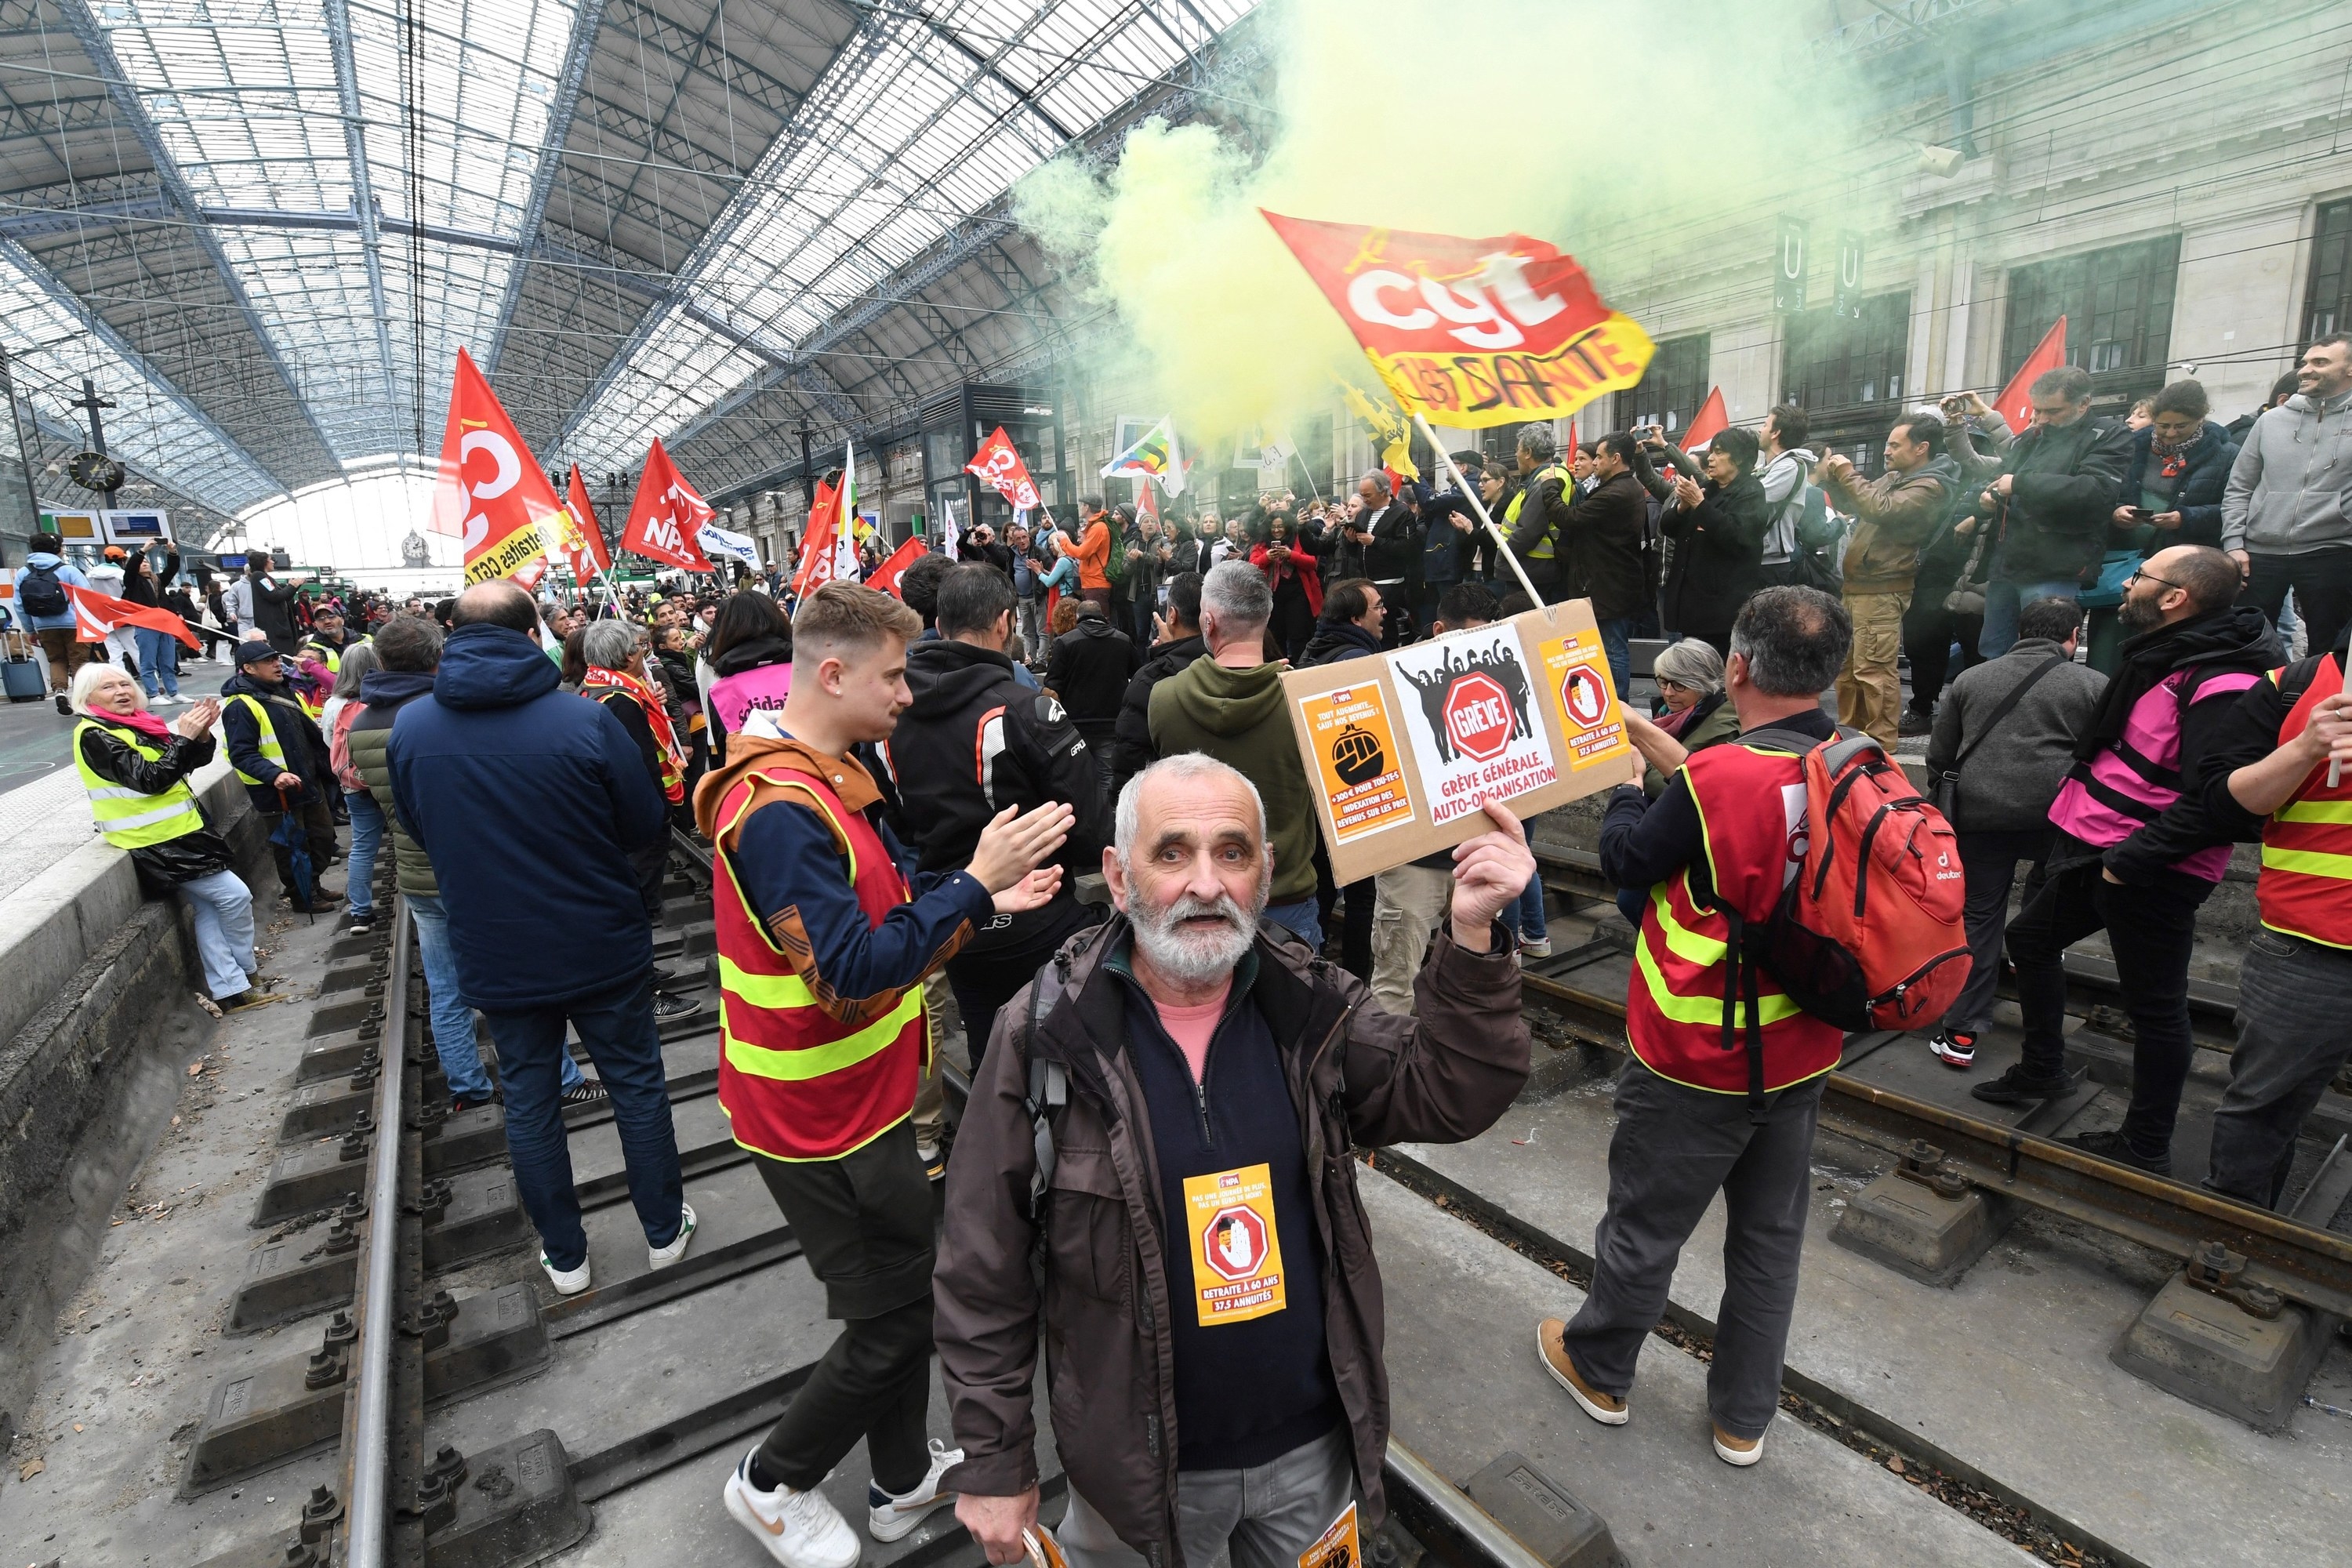 Hundreds of railway union members and supporters holding flags and wearing high-visibility vests fill a train station